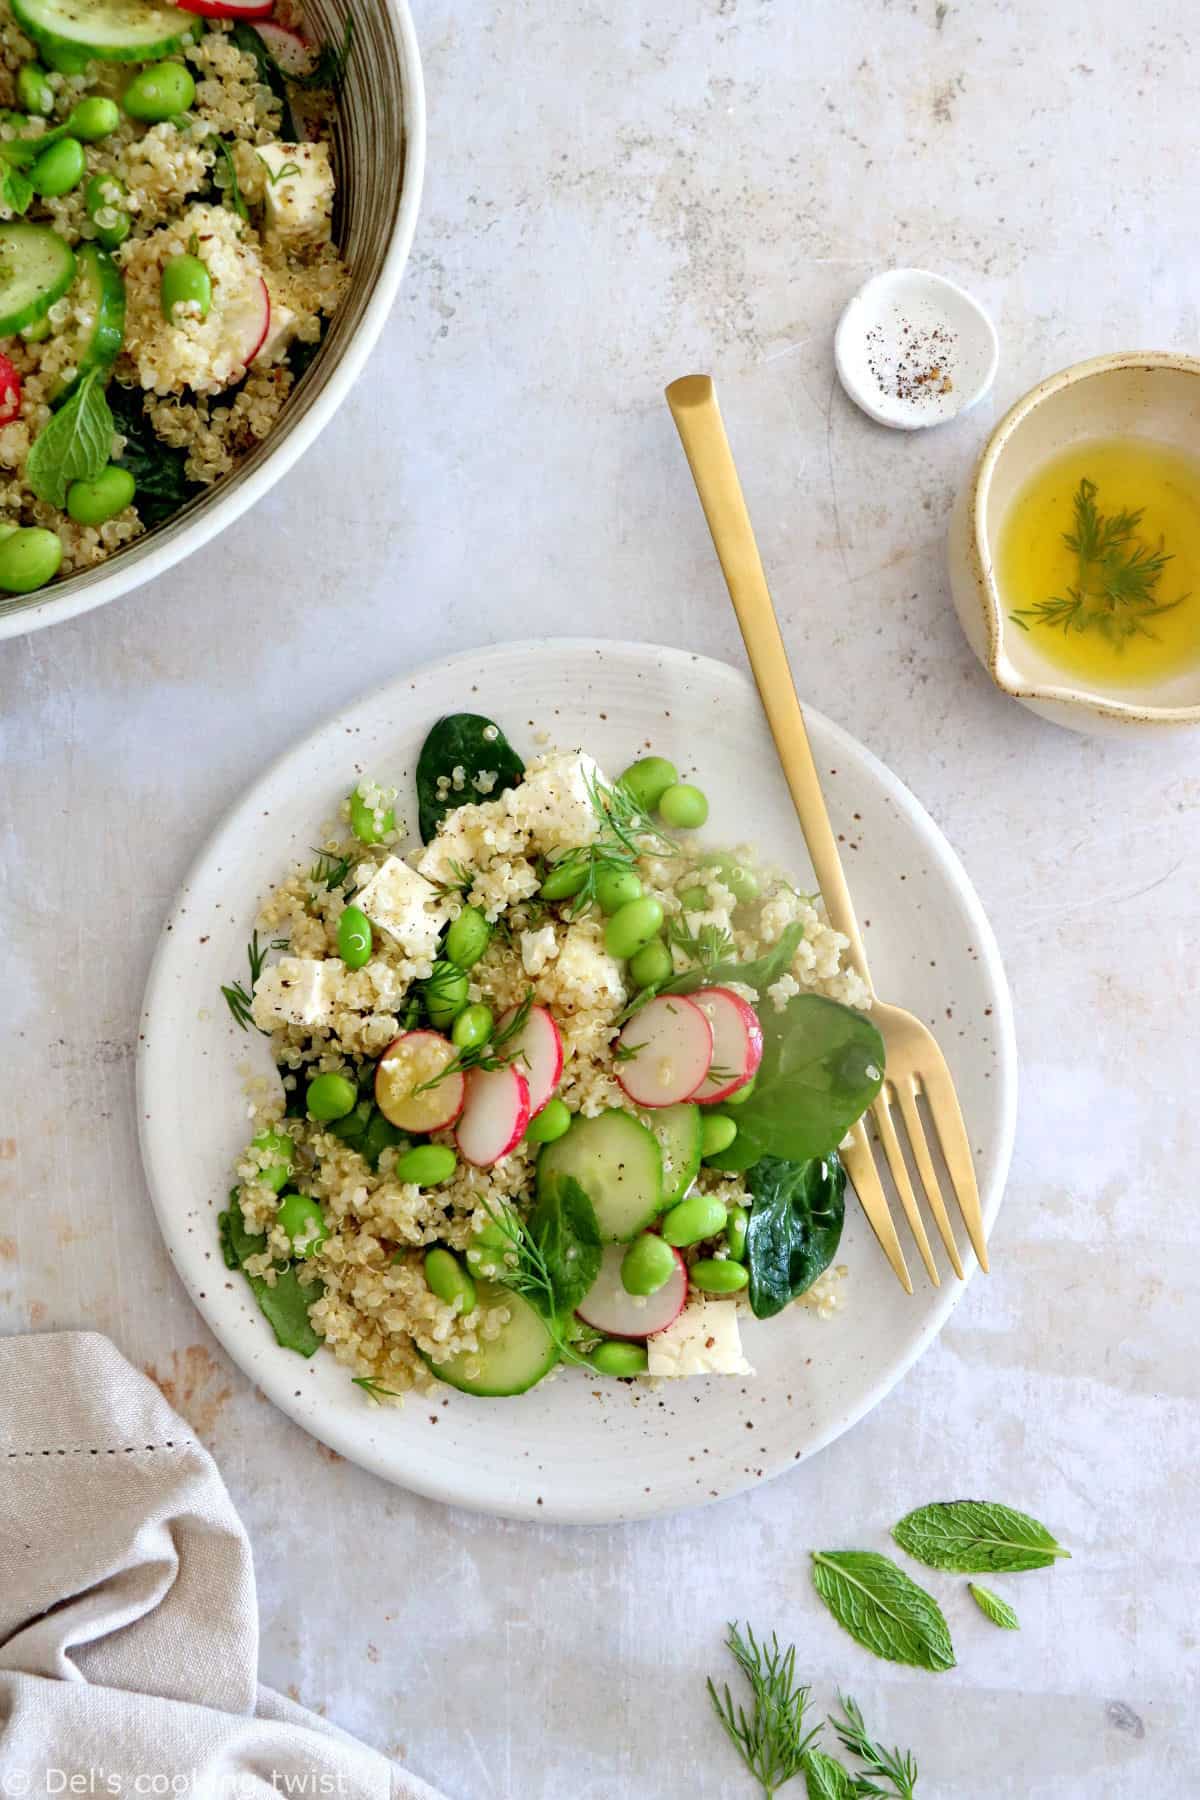 This easy cucumber feta quinoa salad with lemon dill dressing is refreshing, crisp and delicious